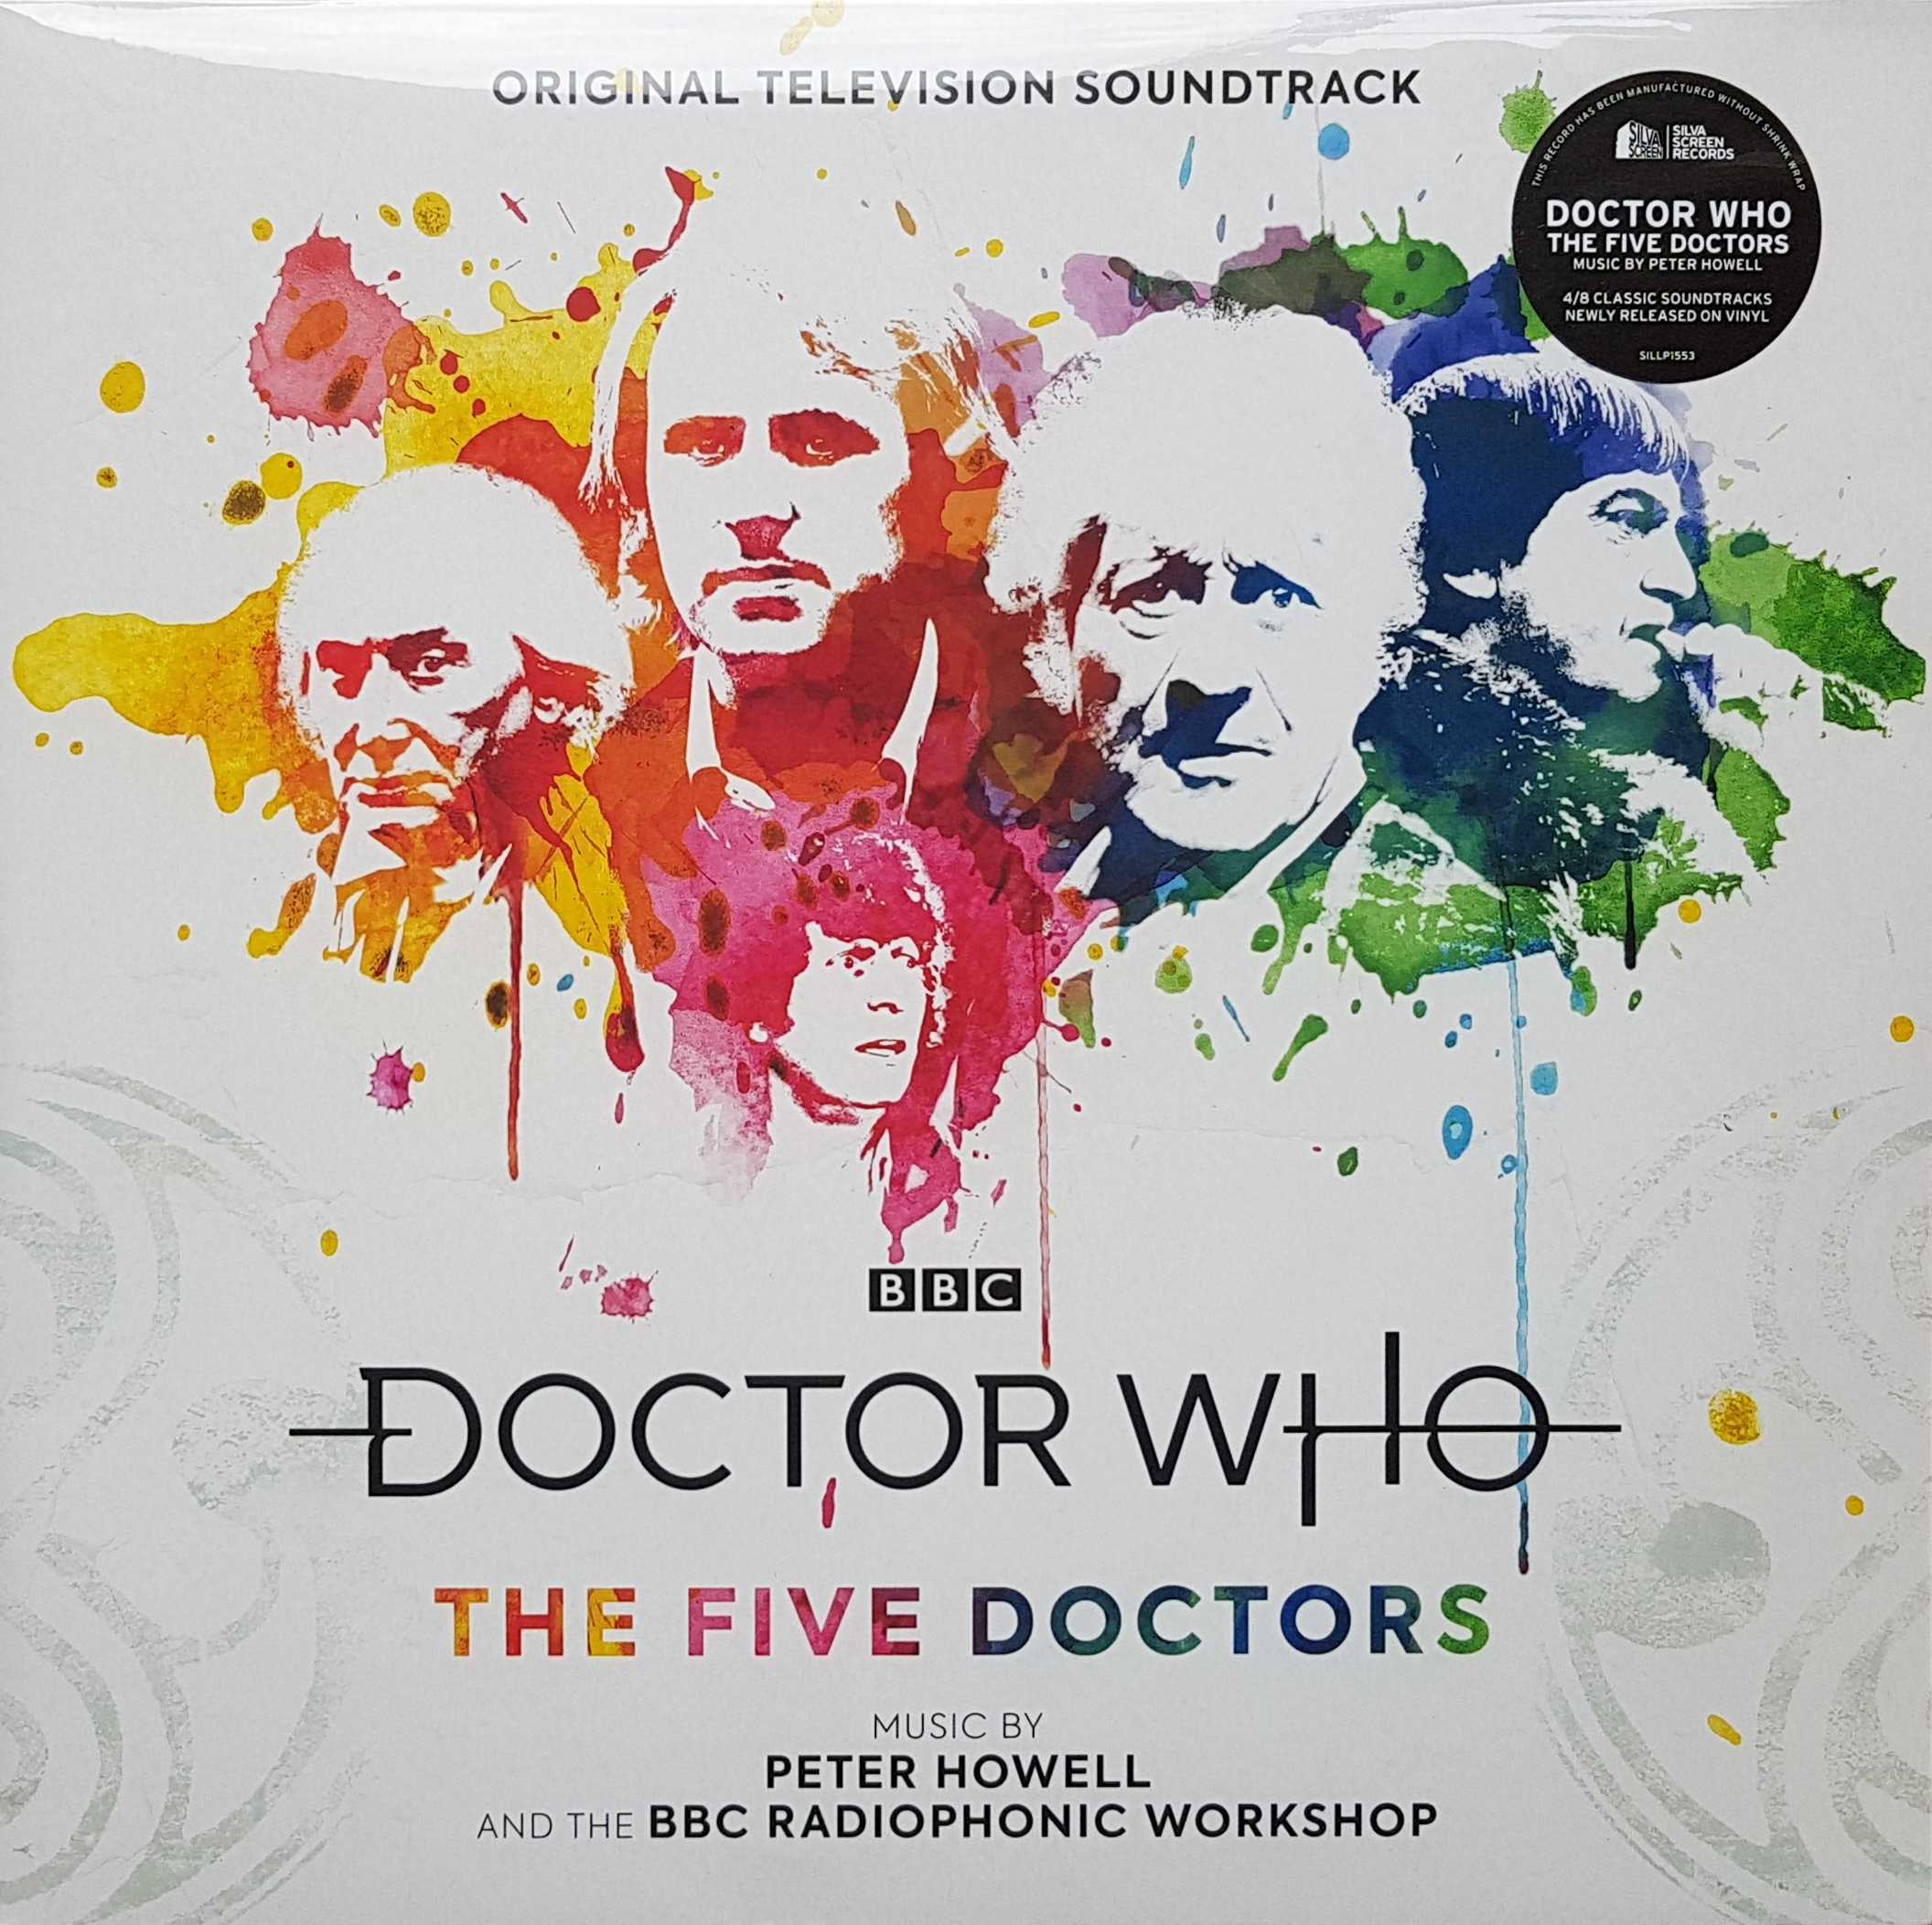 Picture of SILLP 1553 Doctor Who - The five Doctors by artist Peter Howell and the BBC Radiophonic Workshop from the BBC records and Tapes library